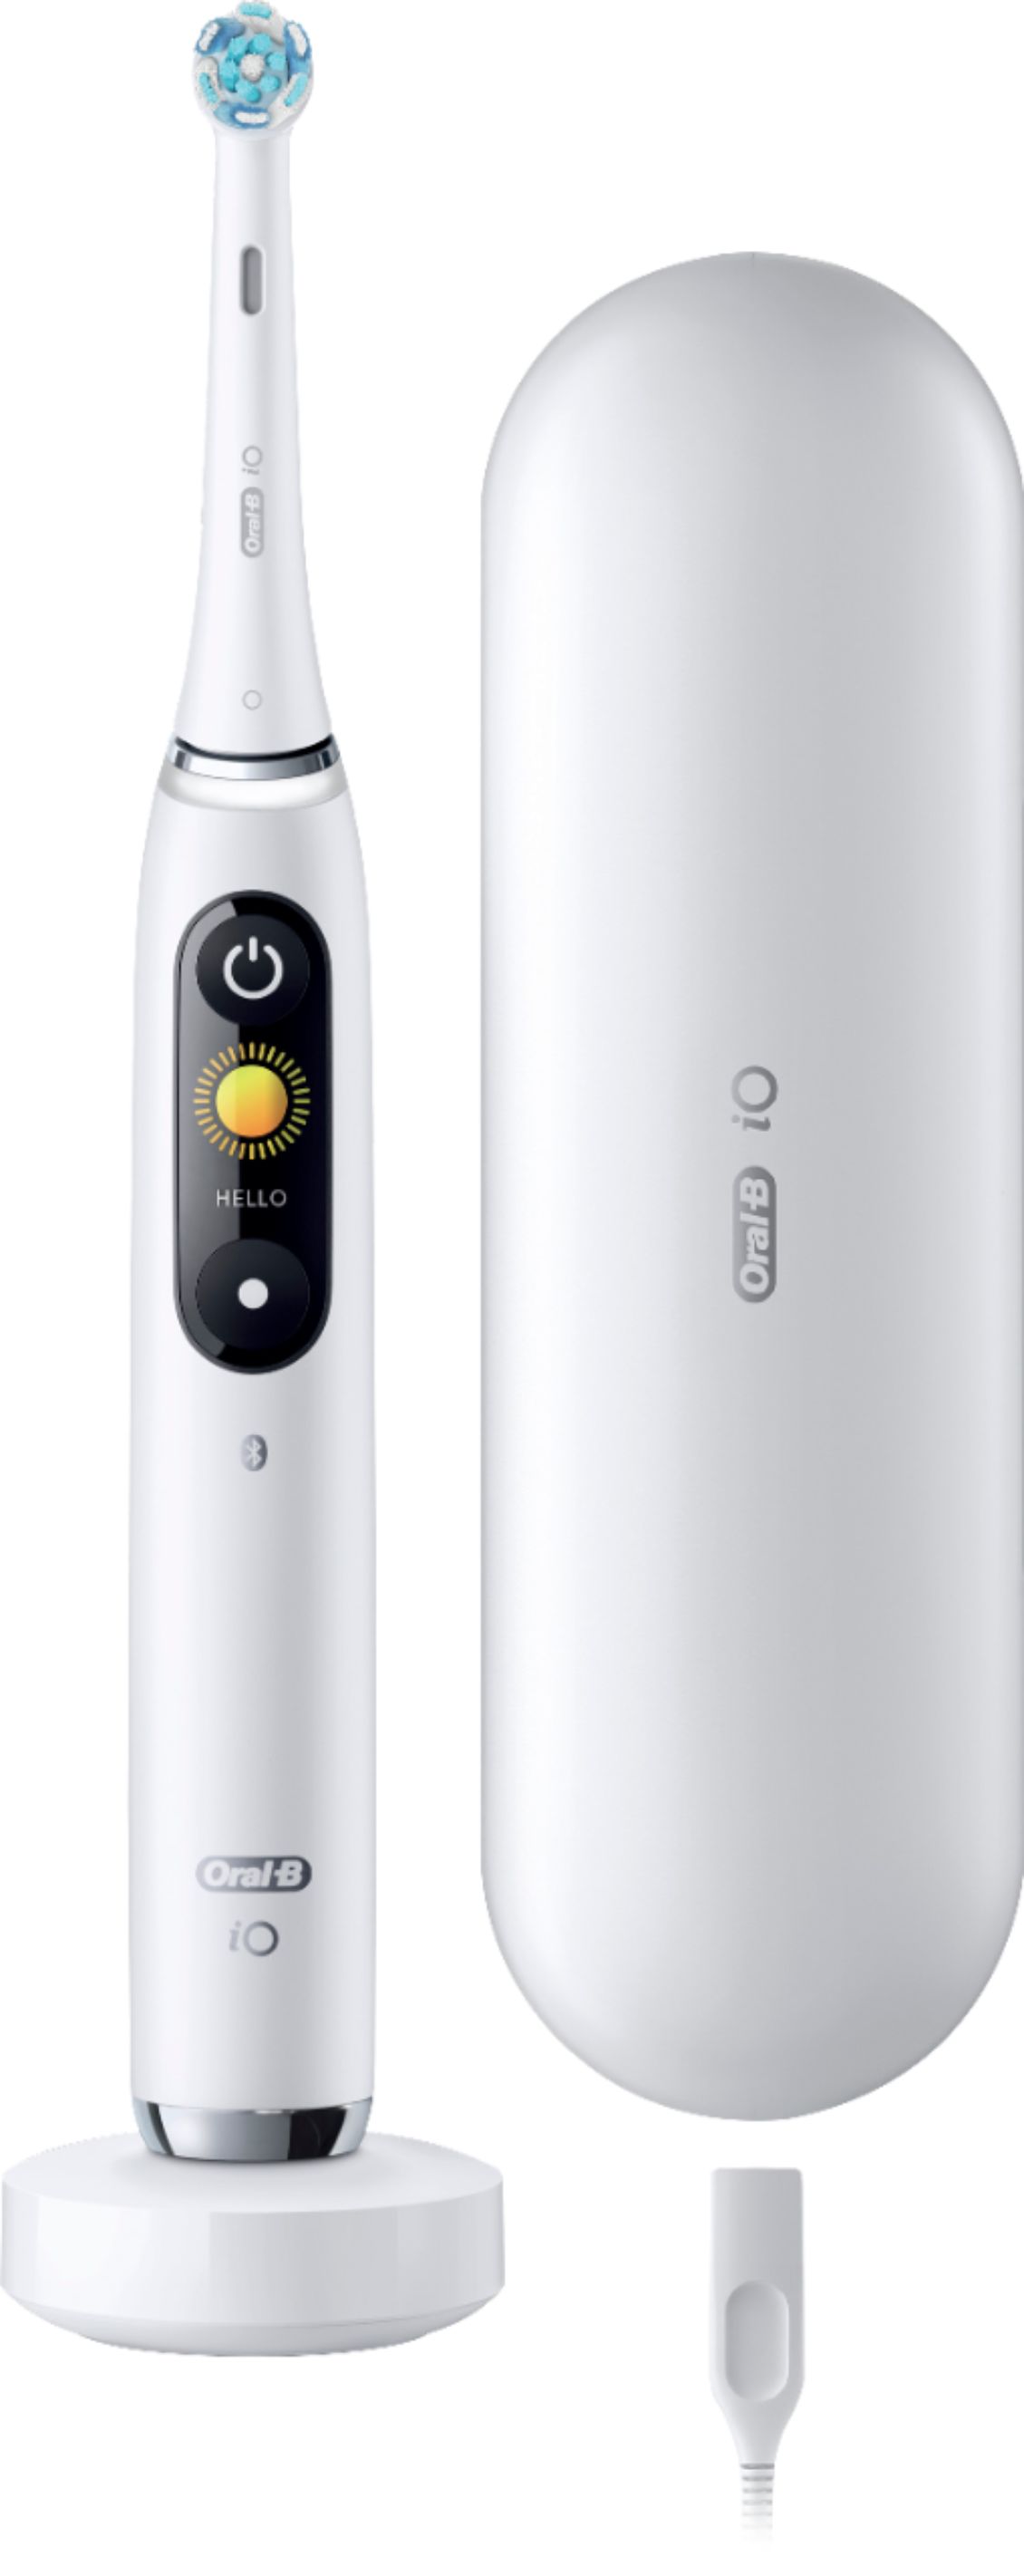 Oral-B IO series 9: A revolutionary electric toothbrush powered by AI